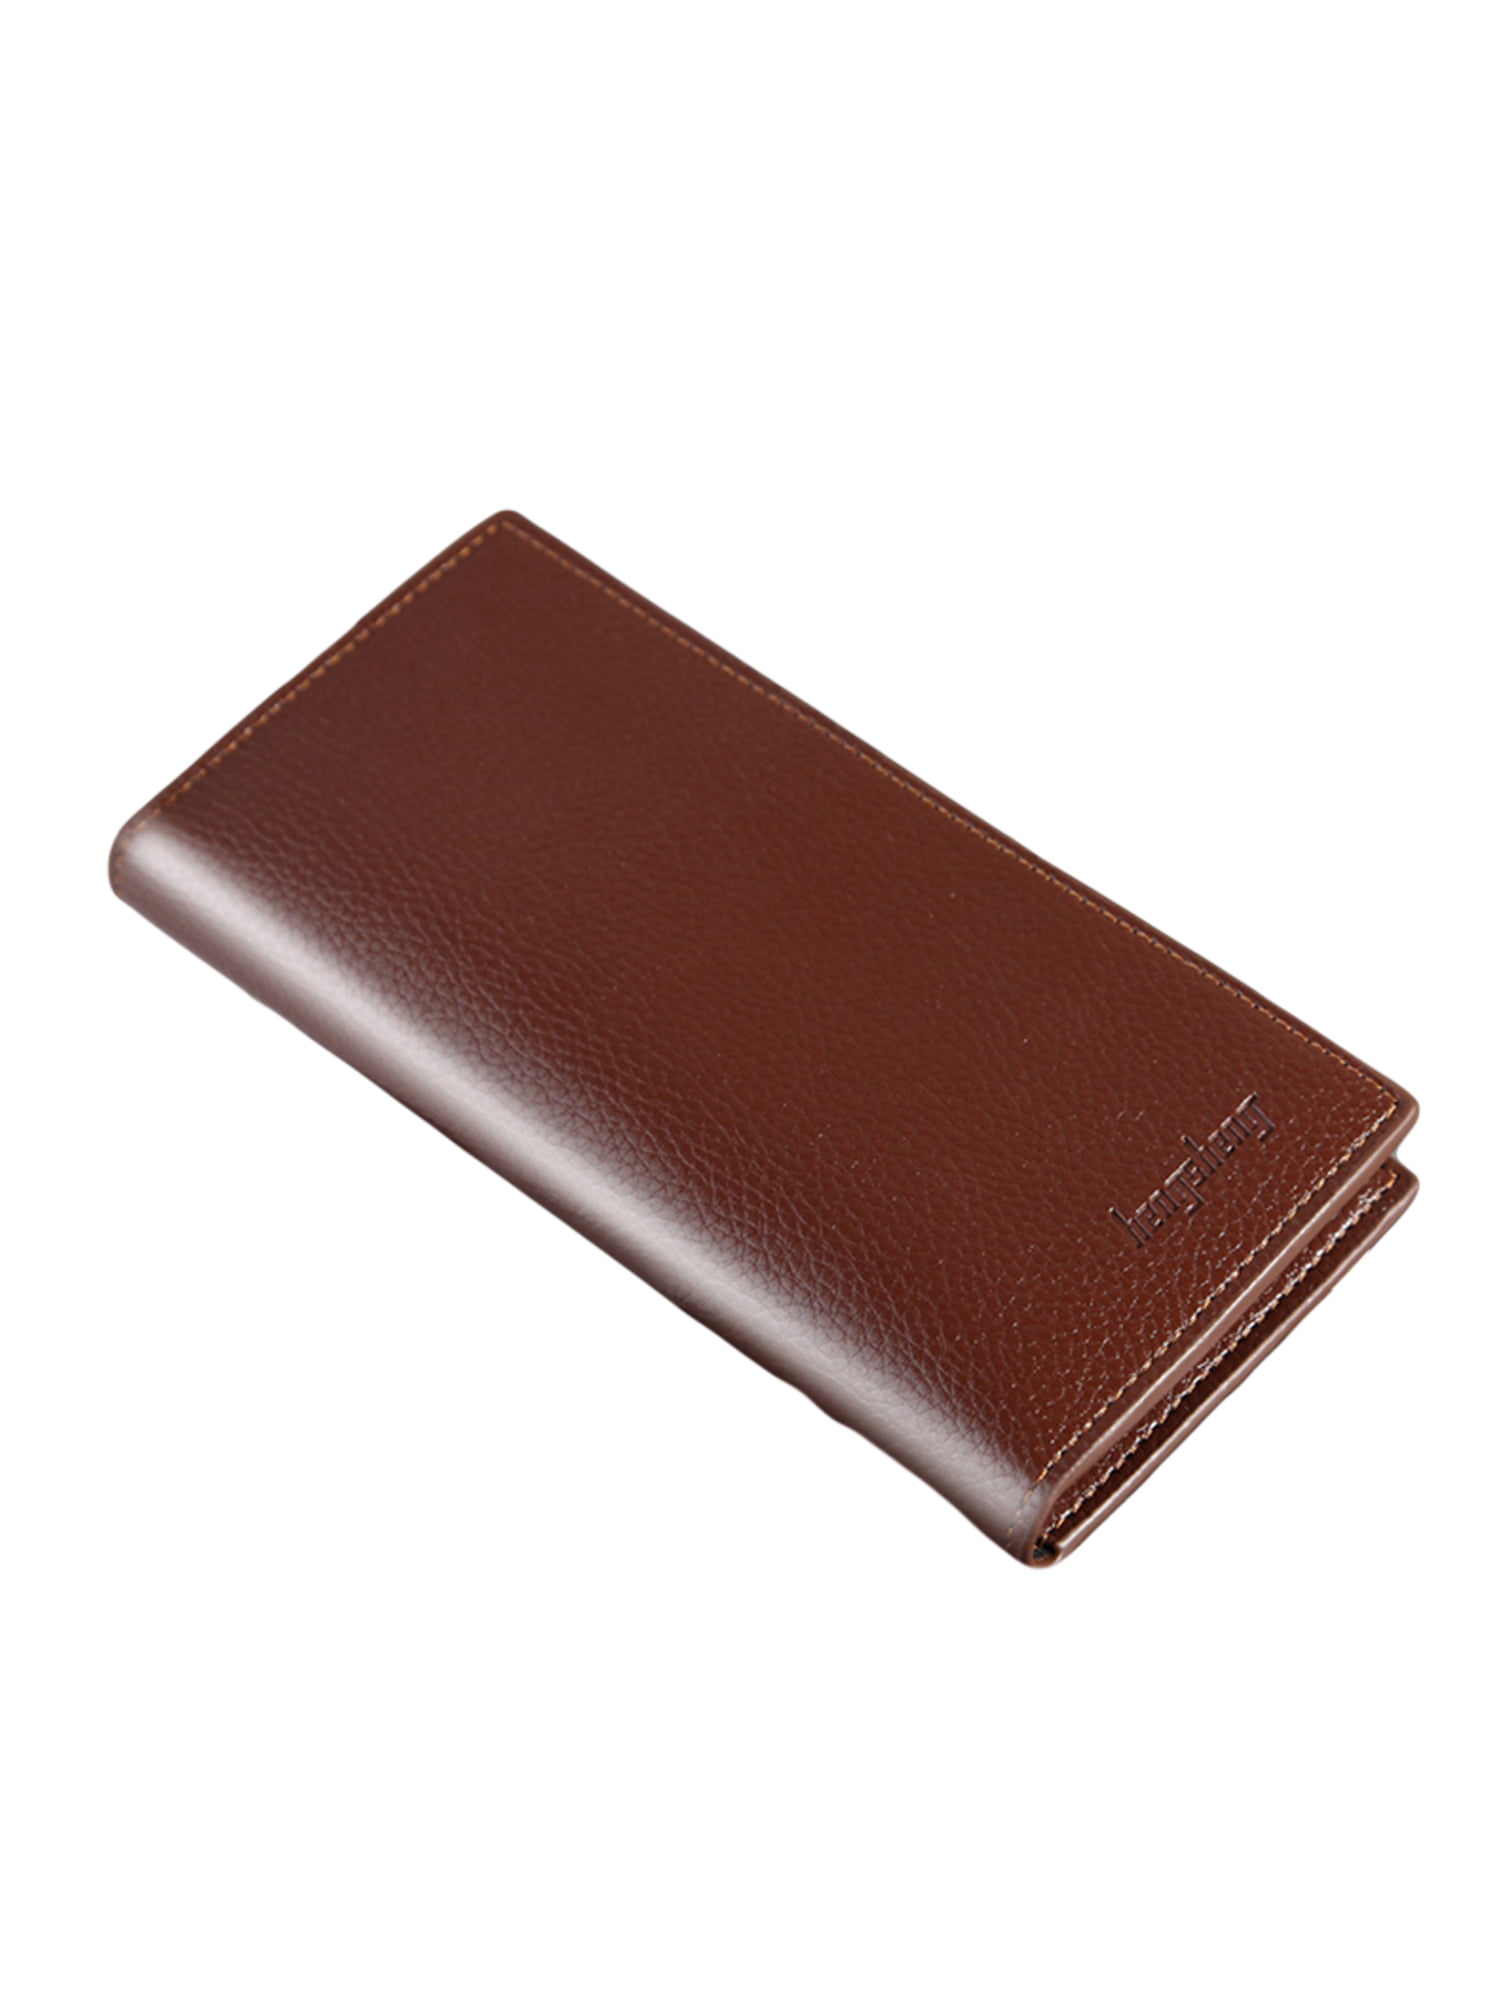 MENS LUXURY BROWN REAL HIGH QUALITY LEATHER CREDIT CARD HOLDER WALLET 